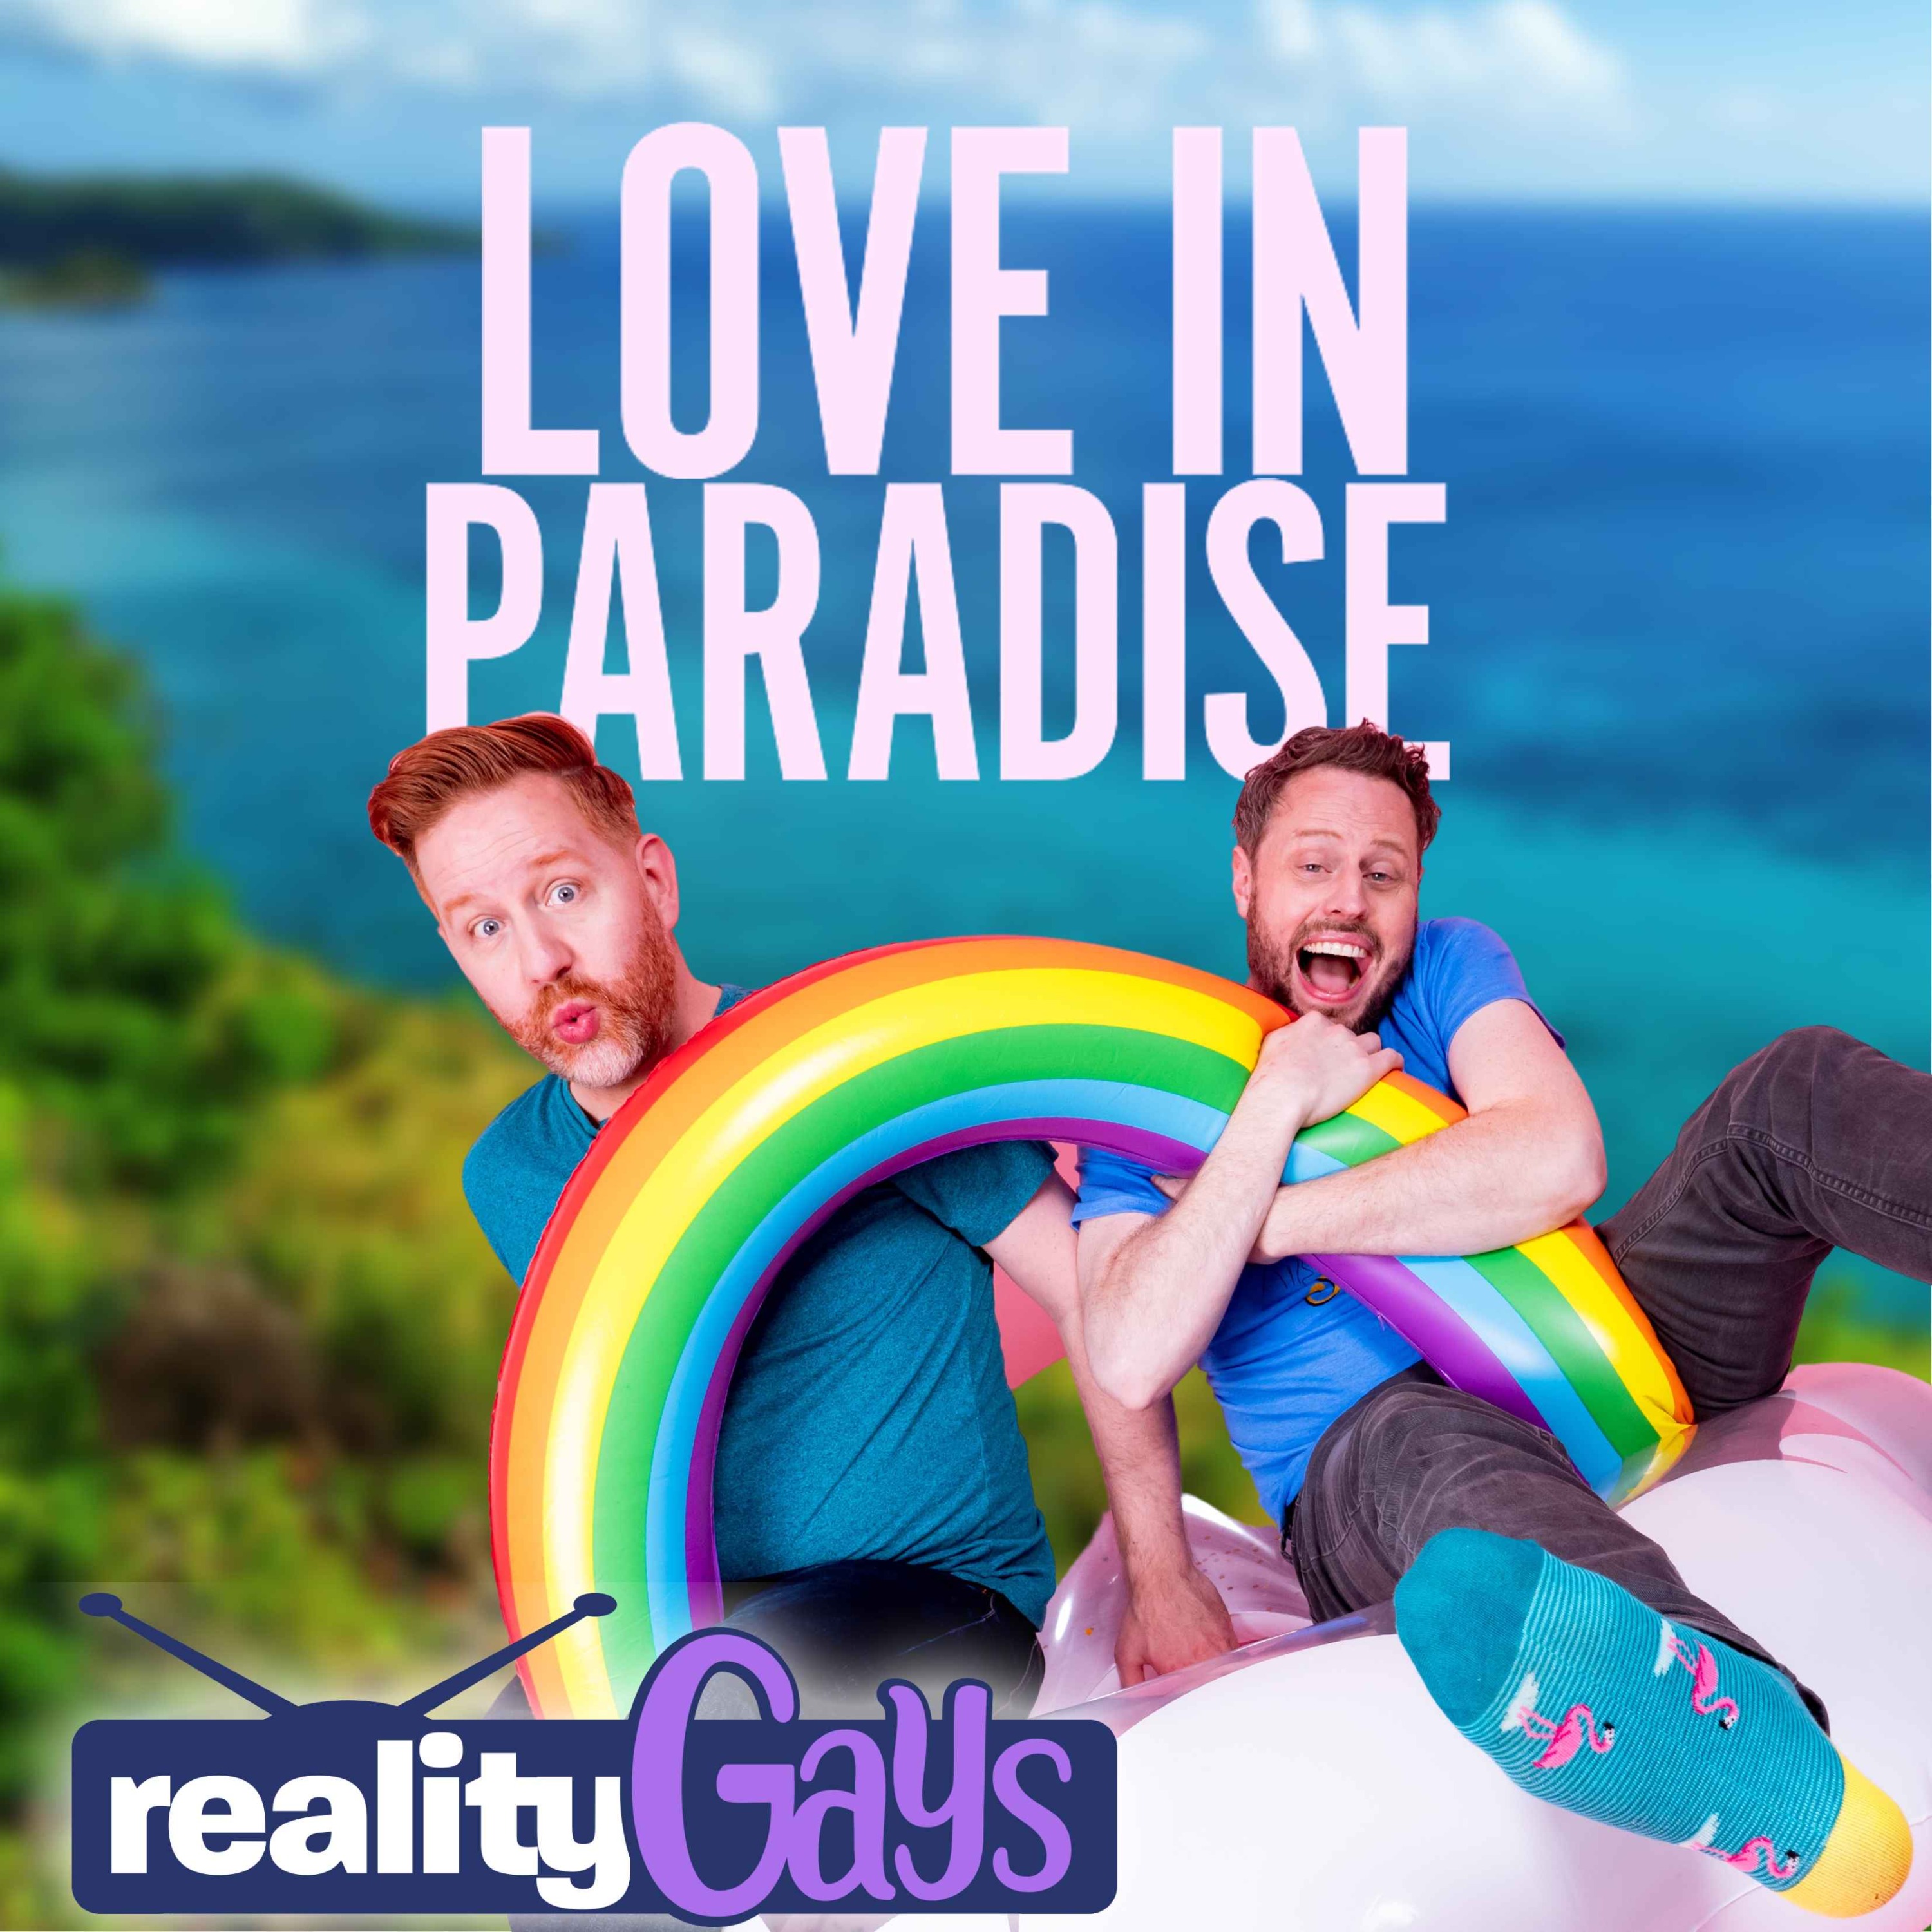 Reality Gays: Trash TV and GayDD with Mattie and Poodle - Love in Paradise: The Caribbean, A 90 Day Story: 0208 &quot;I&#x27;m Coming Out&quot;